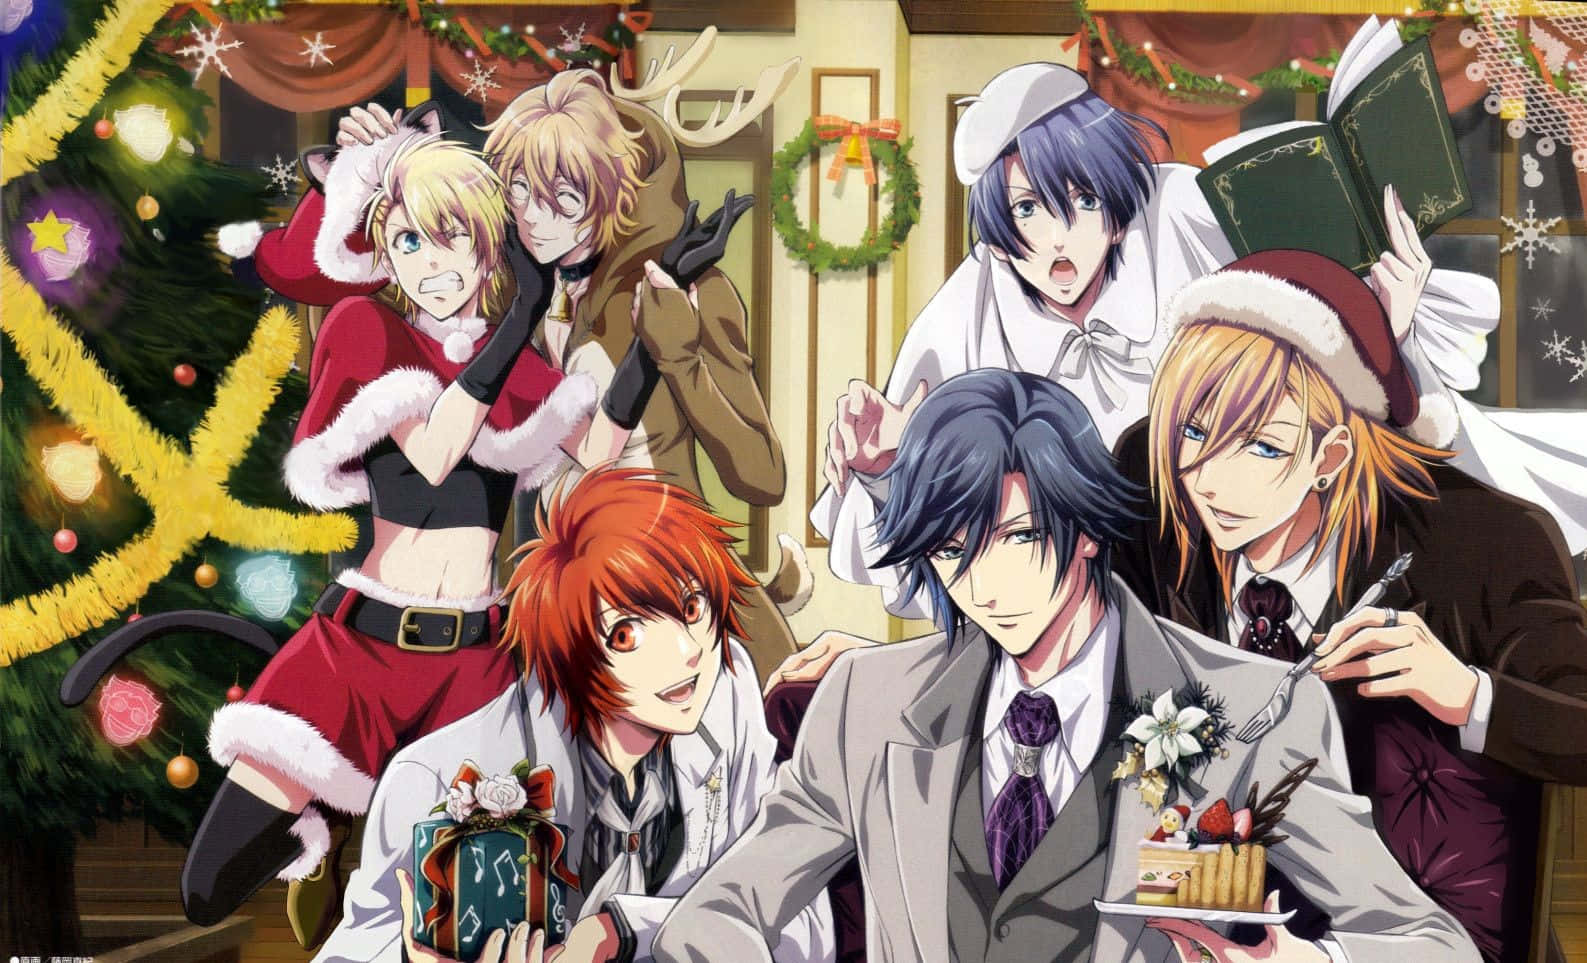 Celebrate the Holidays with Anime Christmas